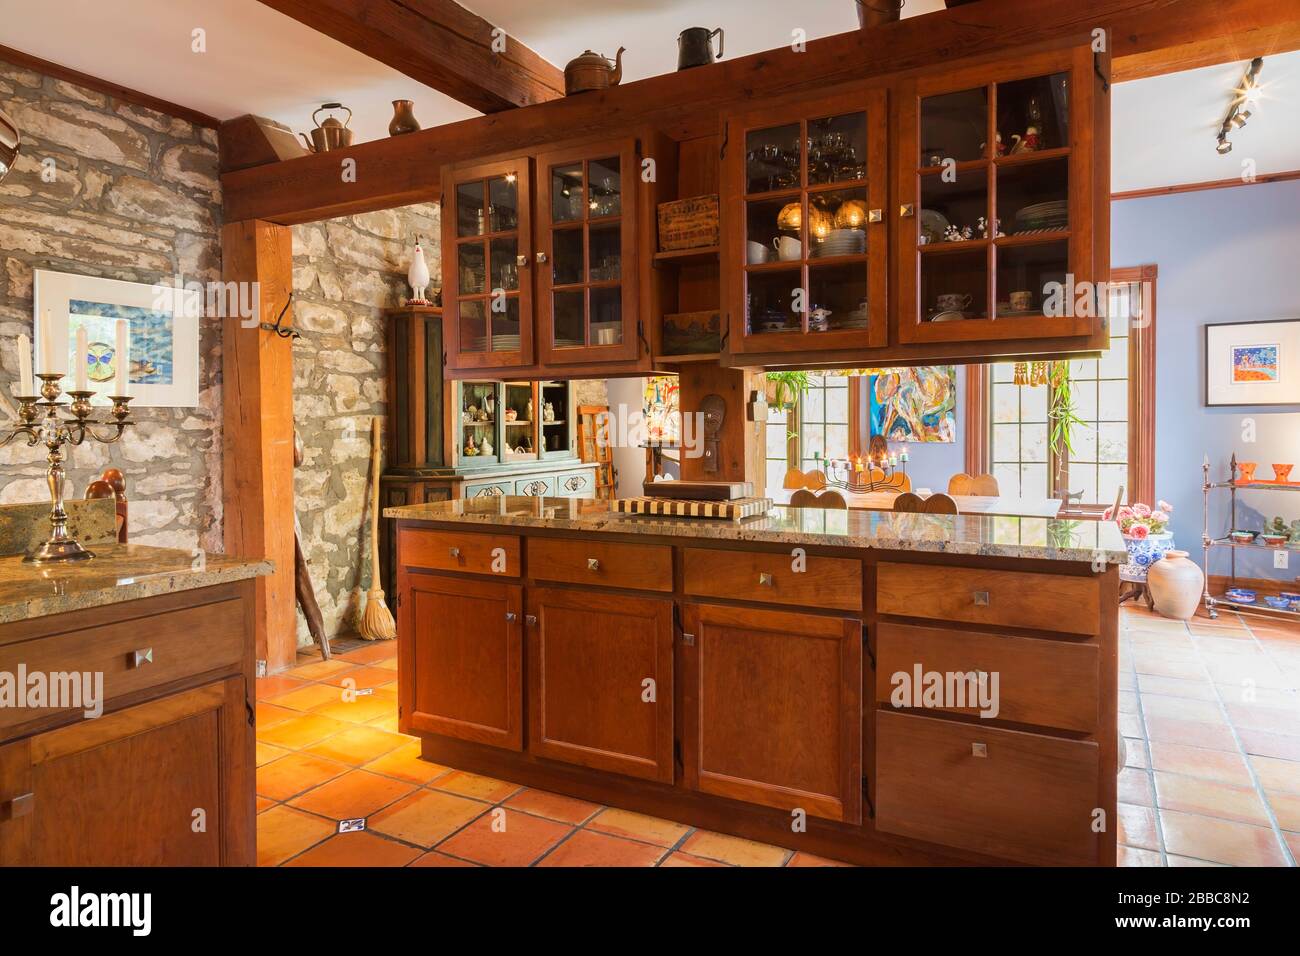 Stained wooden shaker style cabinets and nuanced granite countertops in kitchen with terracotta ceramic tile flooring inside an old circa 1830 Quebecois style country home, Quebec, Canada. This image is property released. CUPR0357 Stock Photo